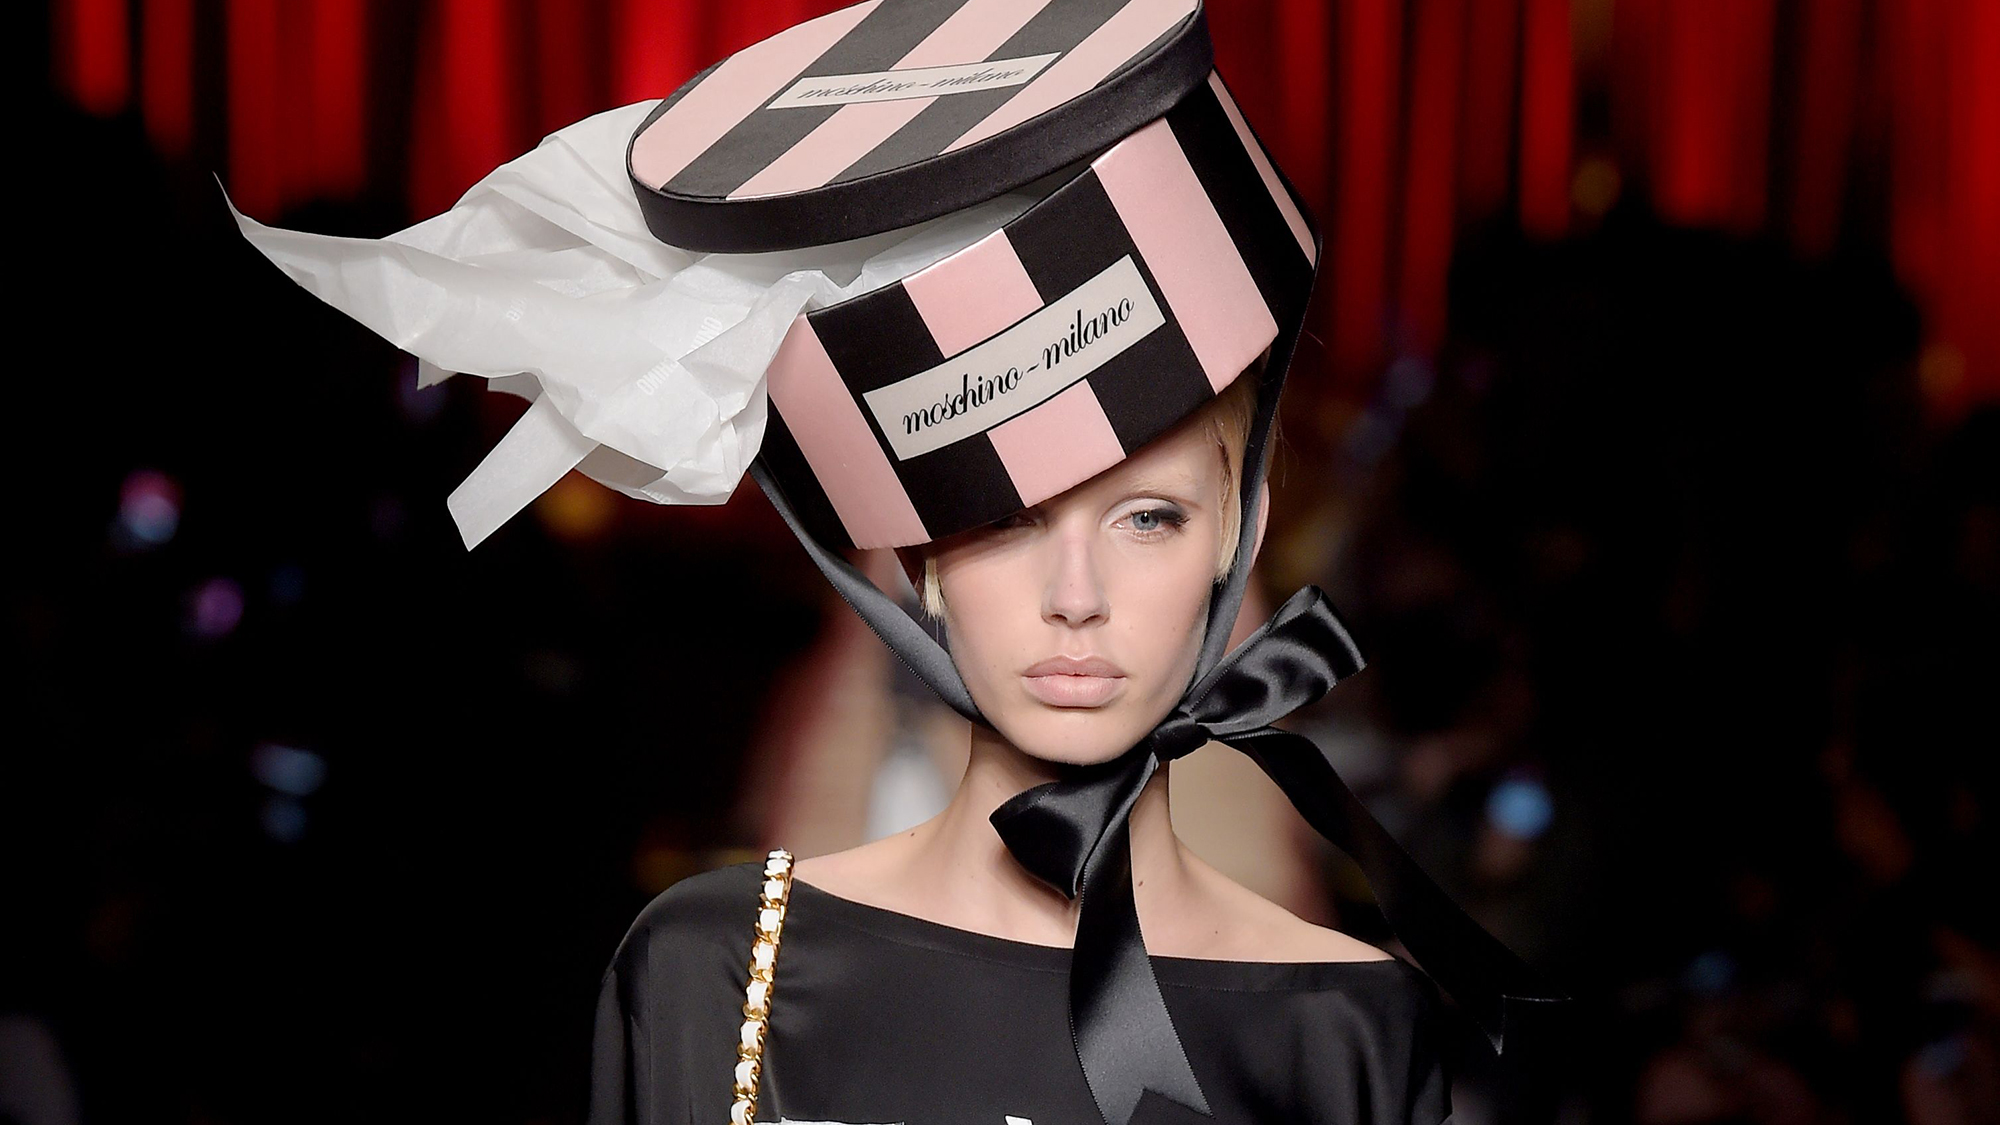 10 weird fashion accessories that made it on the runway